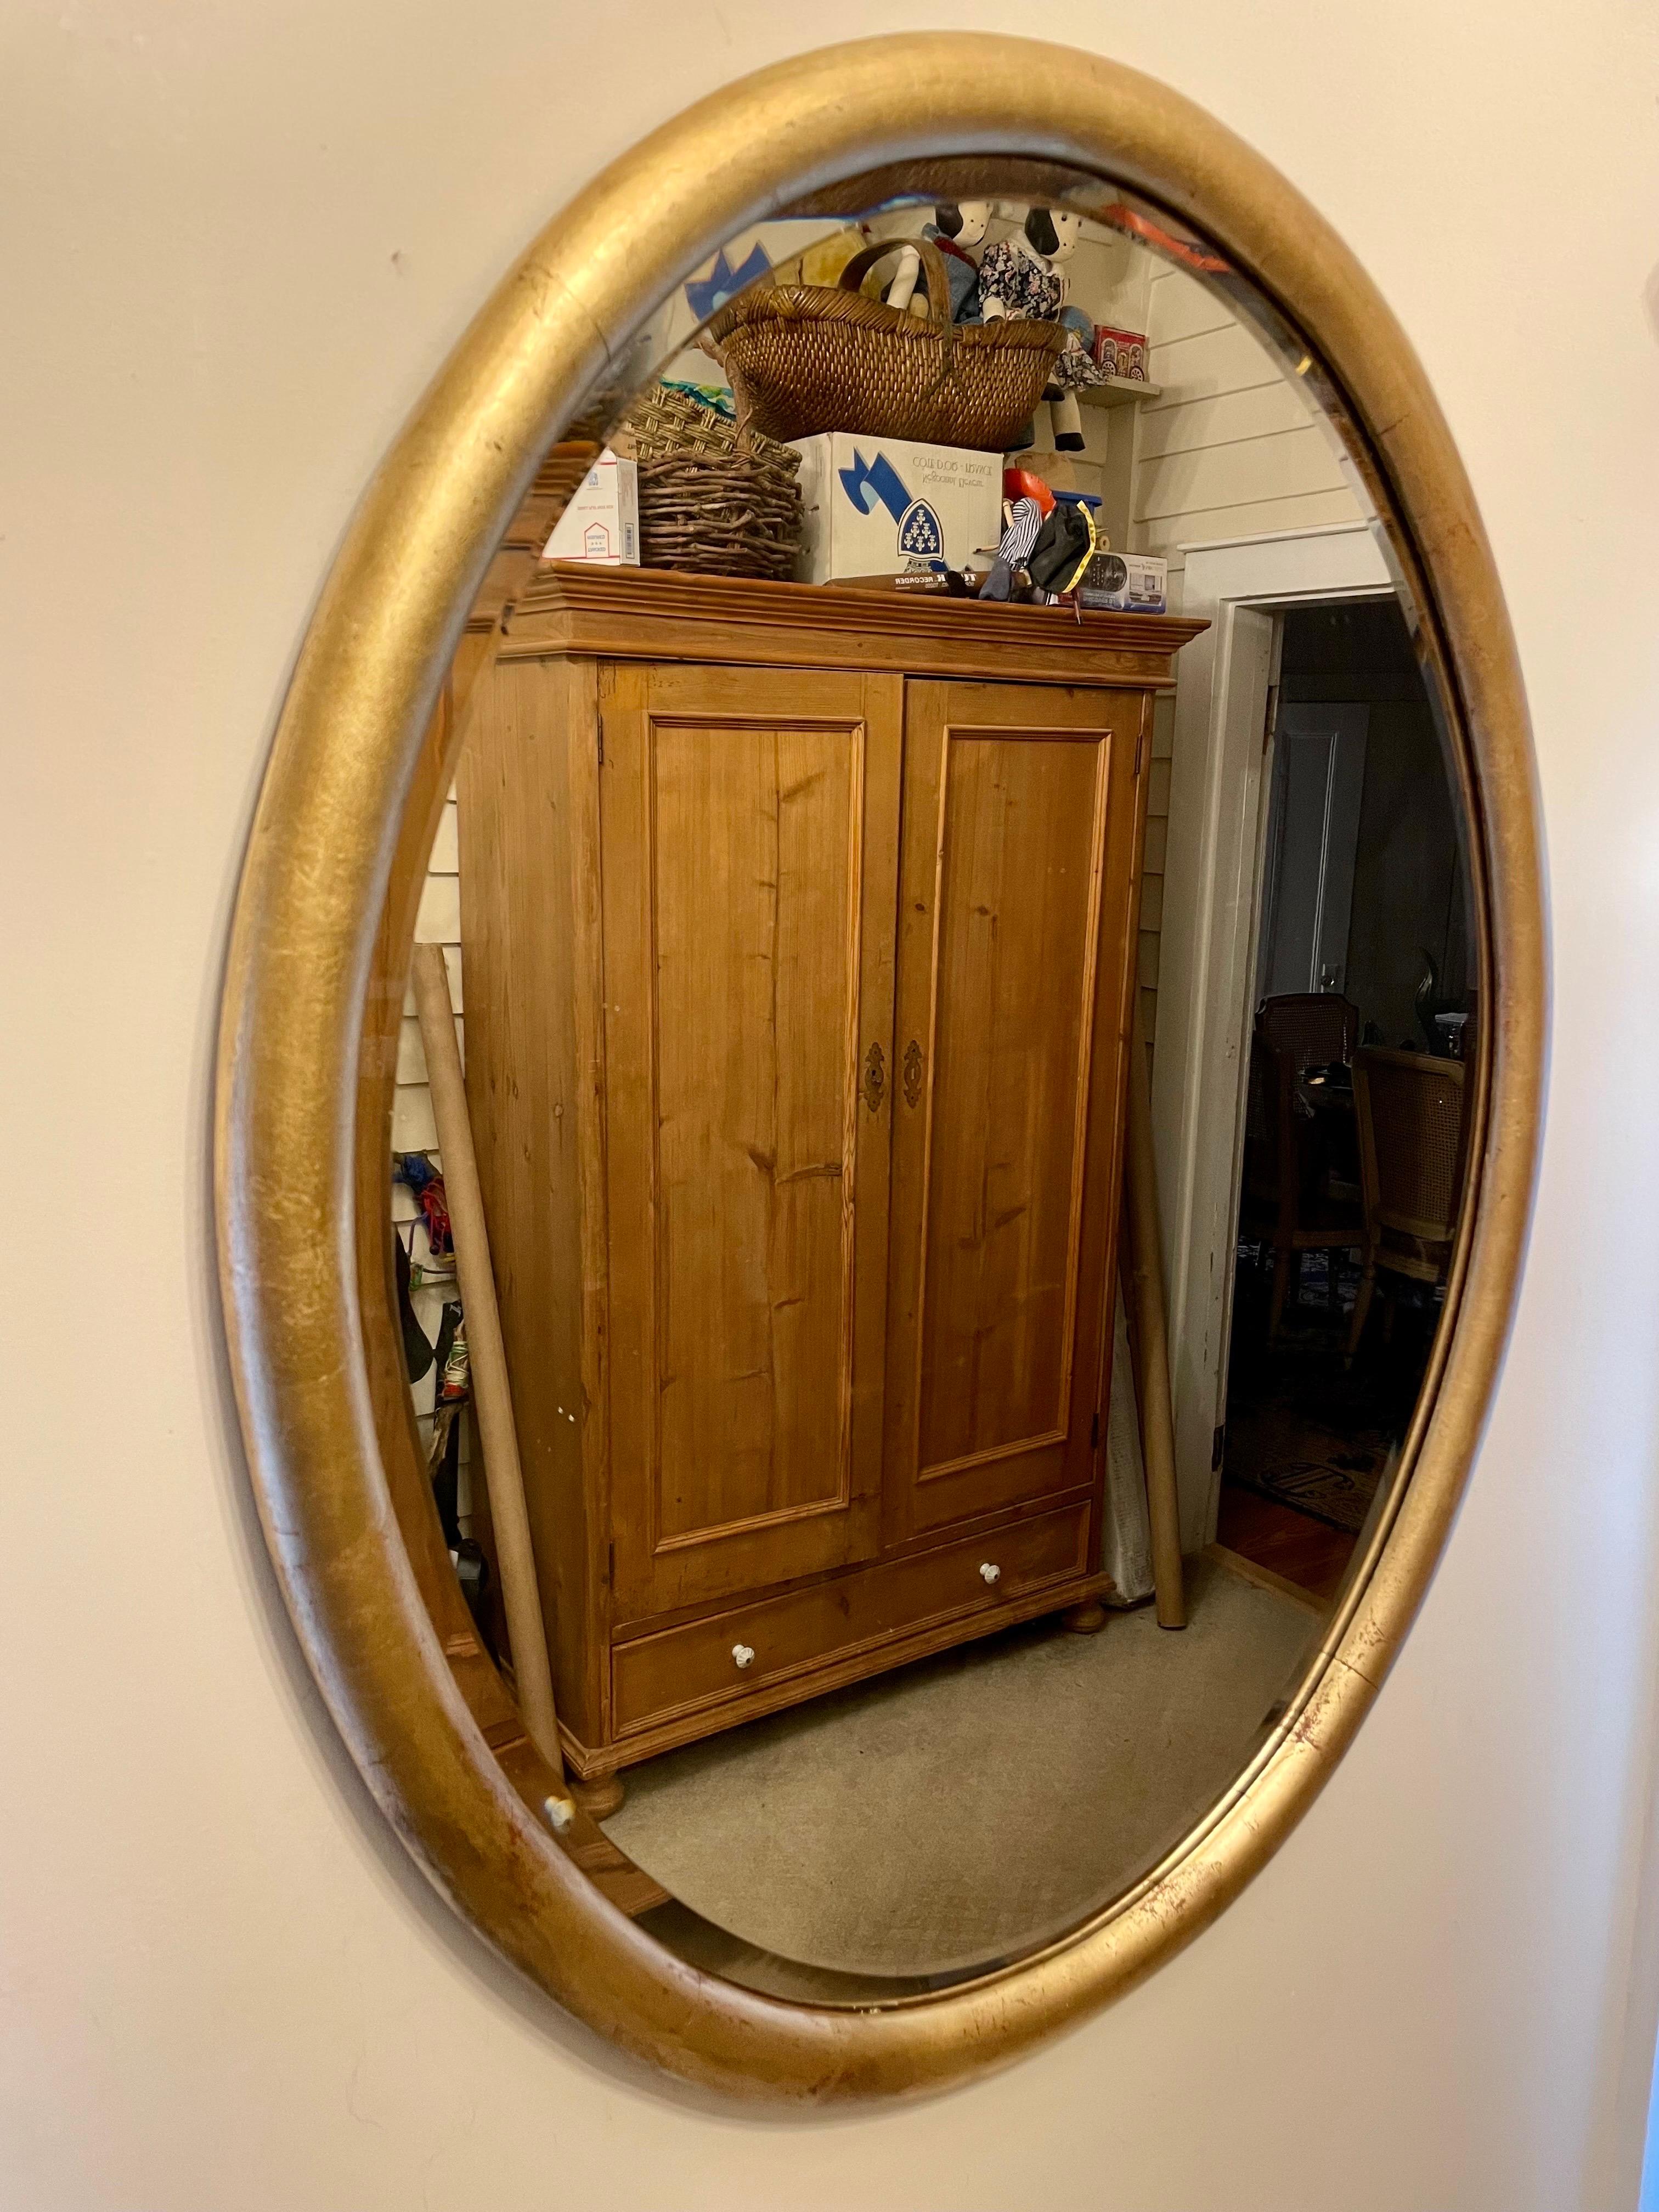 Antique gilt wood oval mirror. Original beveled mirror has great distressing and age marks from years of use. Great size, Measures 30